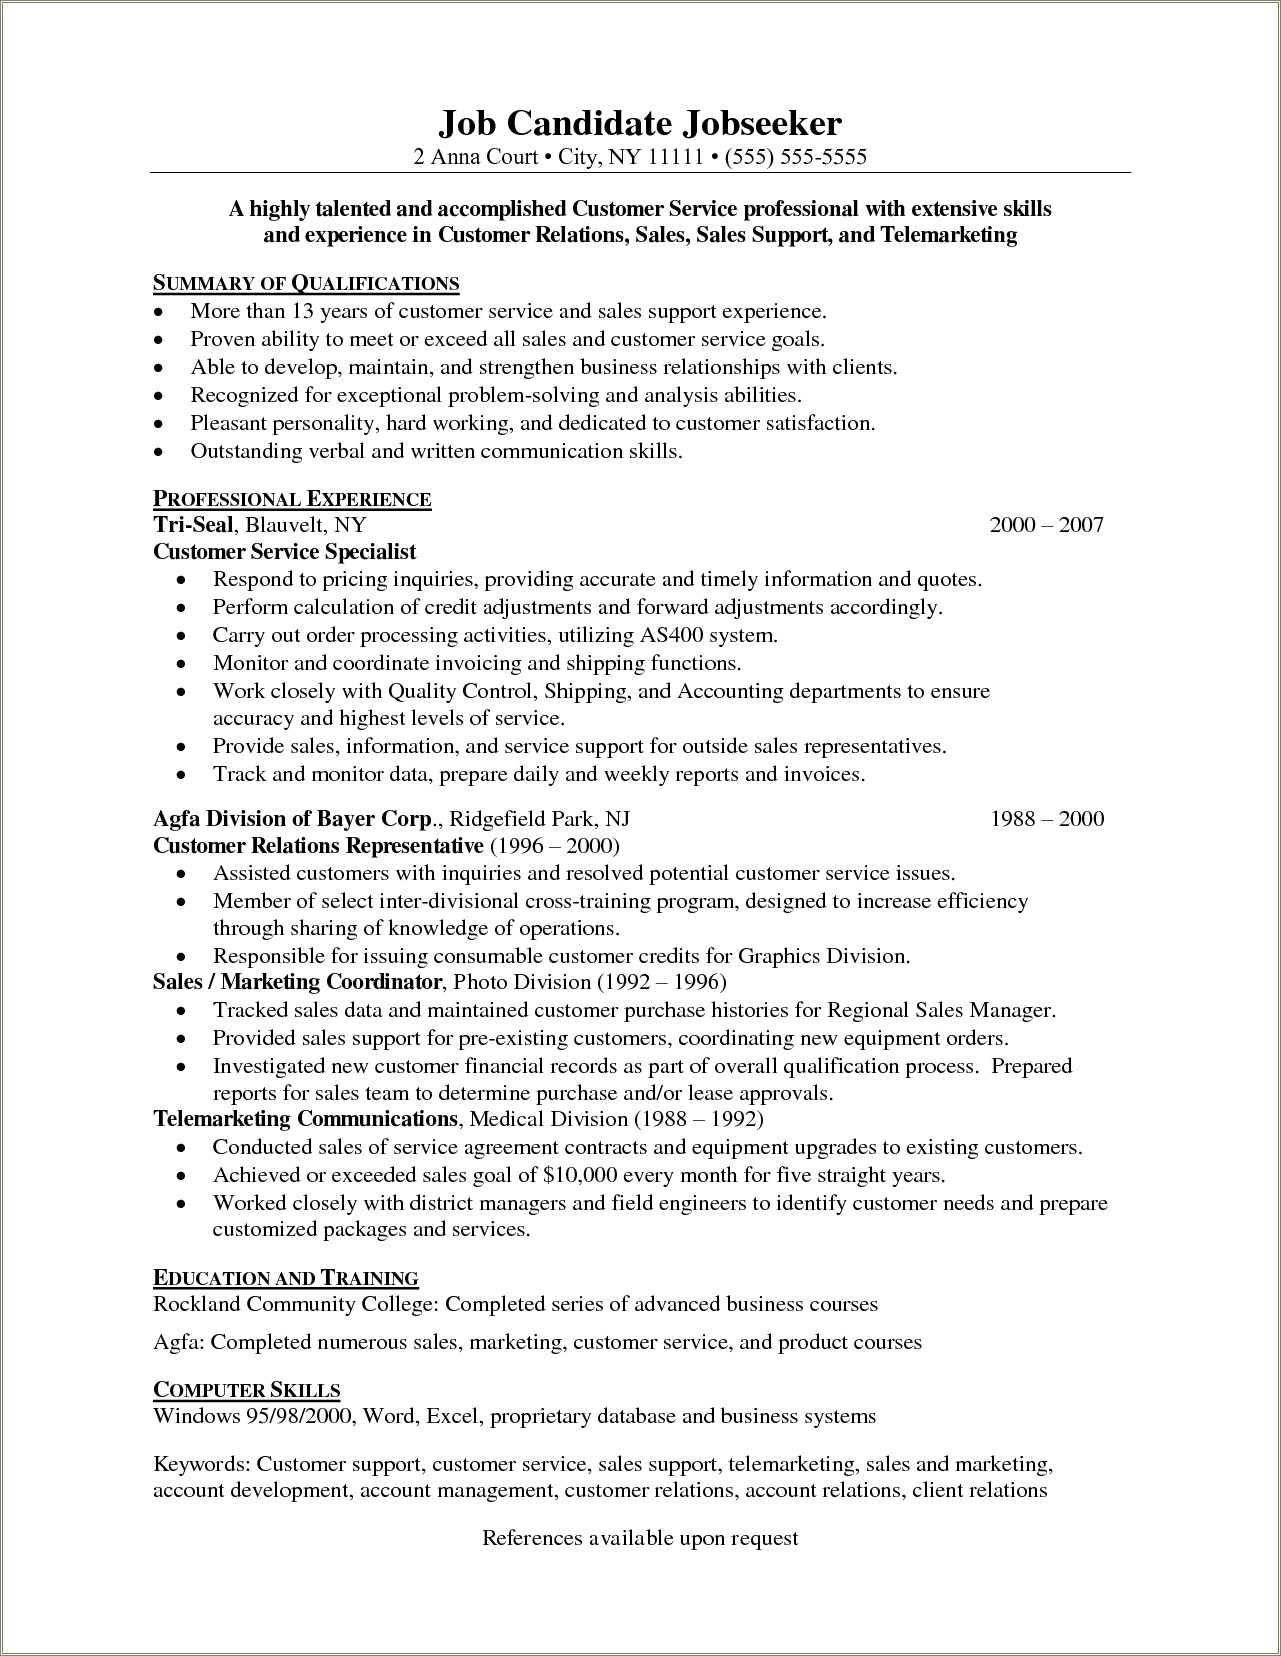 Best Resume Formats 2018 For Account Managers